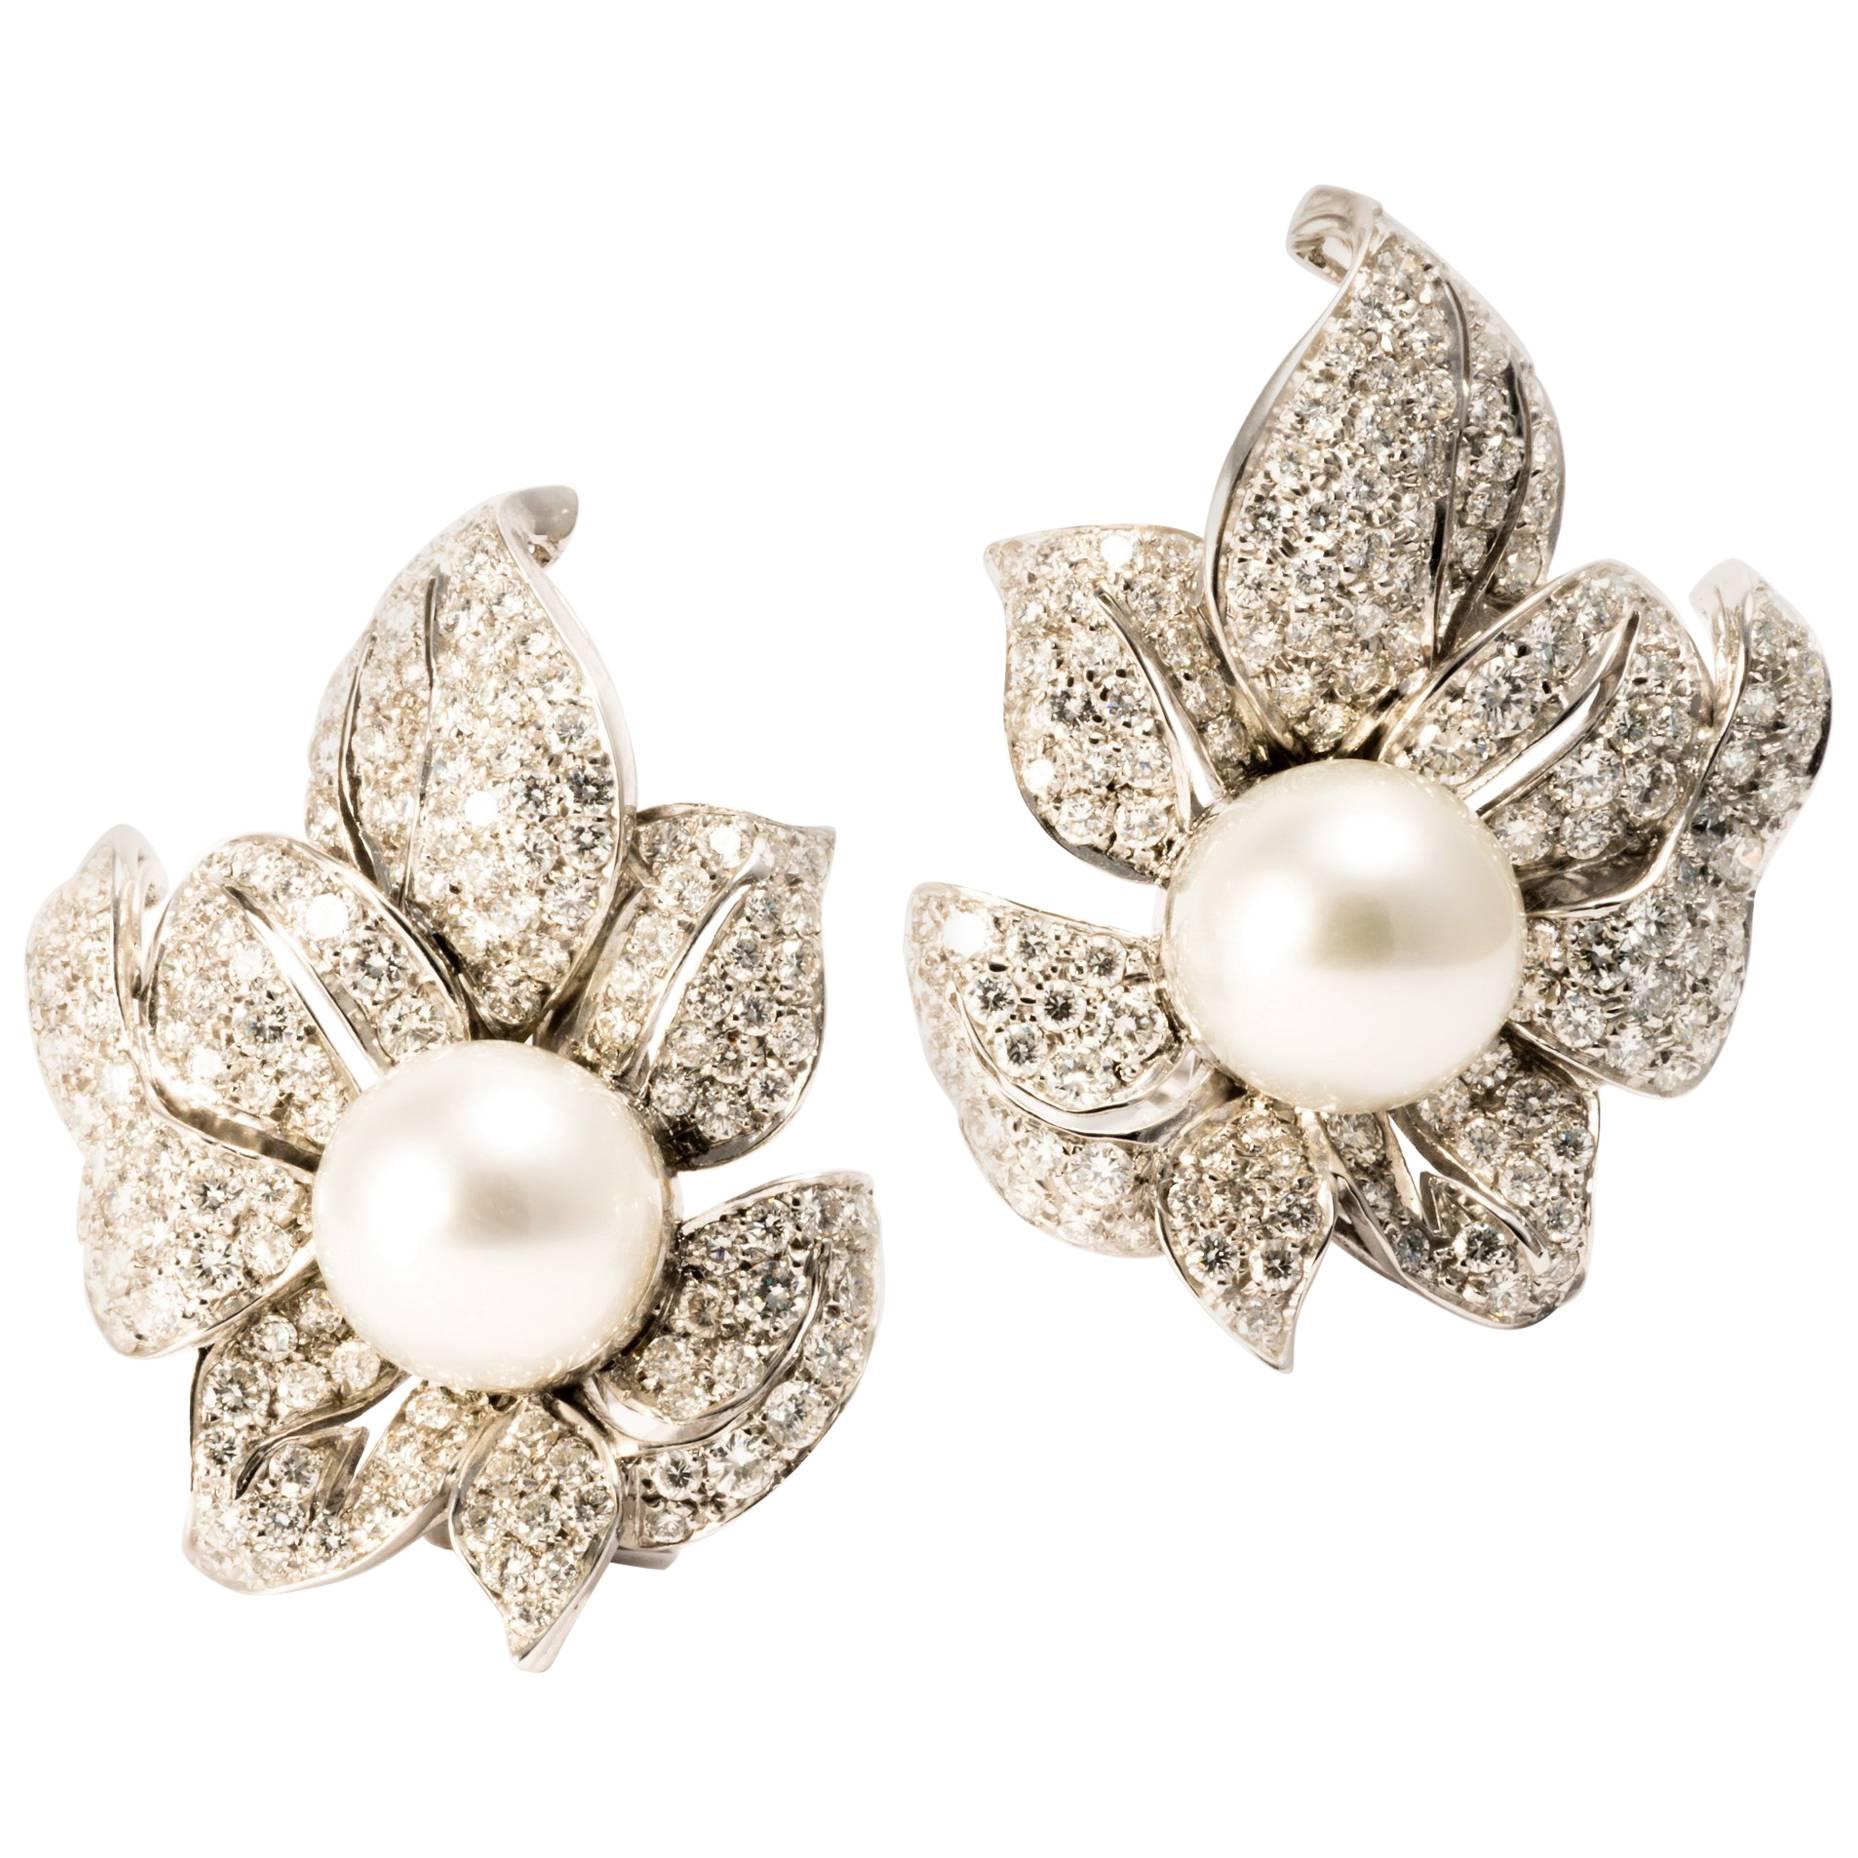 Ansuini Diamonds and Pearls 18K White Gold Orchid Earrings For Sale